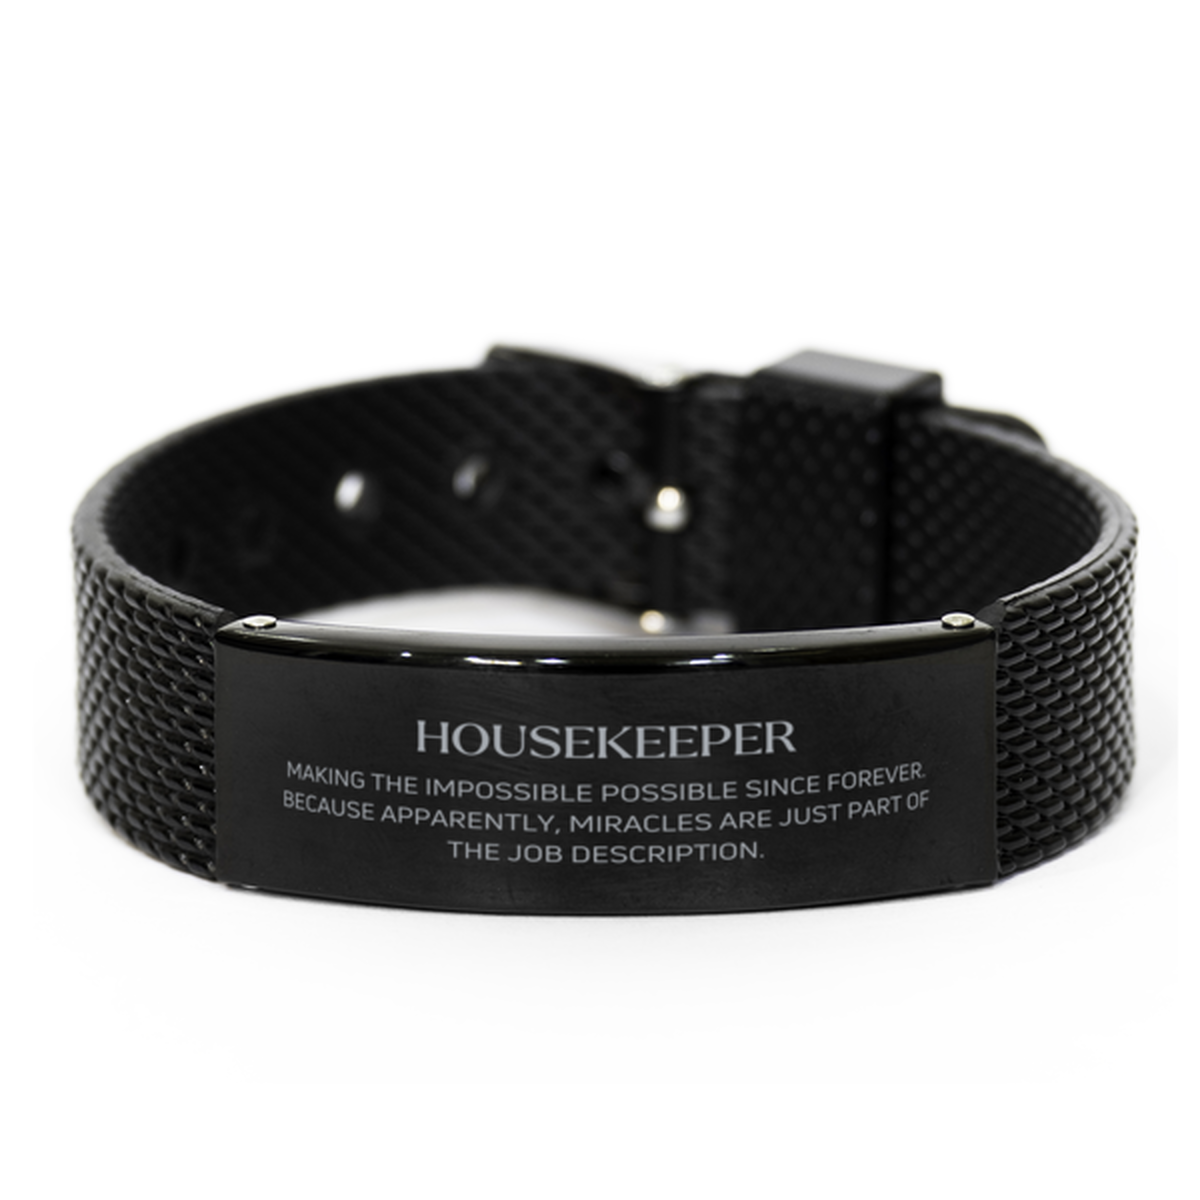 Funny Housekeeper Gifts, Miracles are just part of the job description, Inspirational Birthday Black Shark Mesh Bracelet For Housekeeper, Men, Women, Coworkers, Friends, Boss